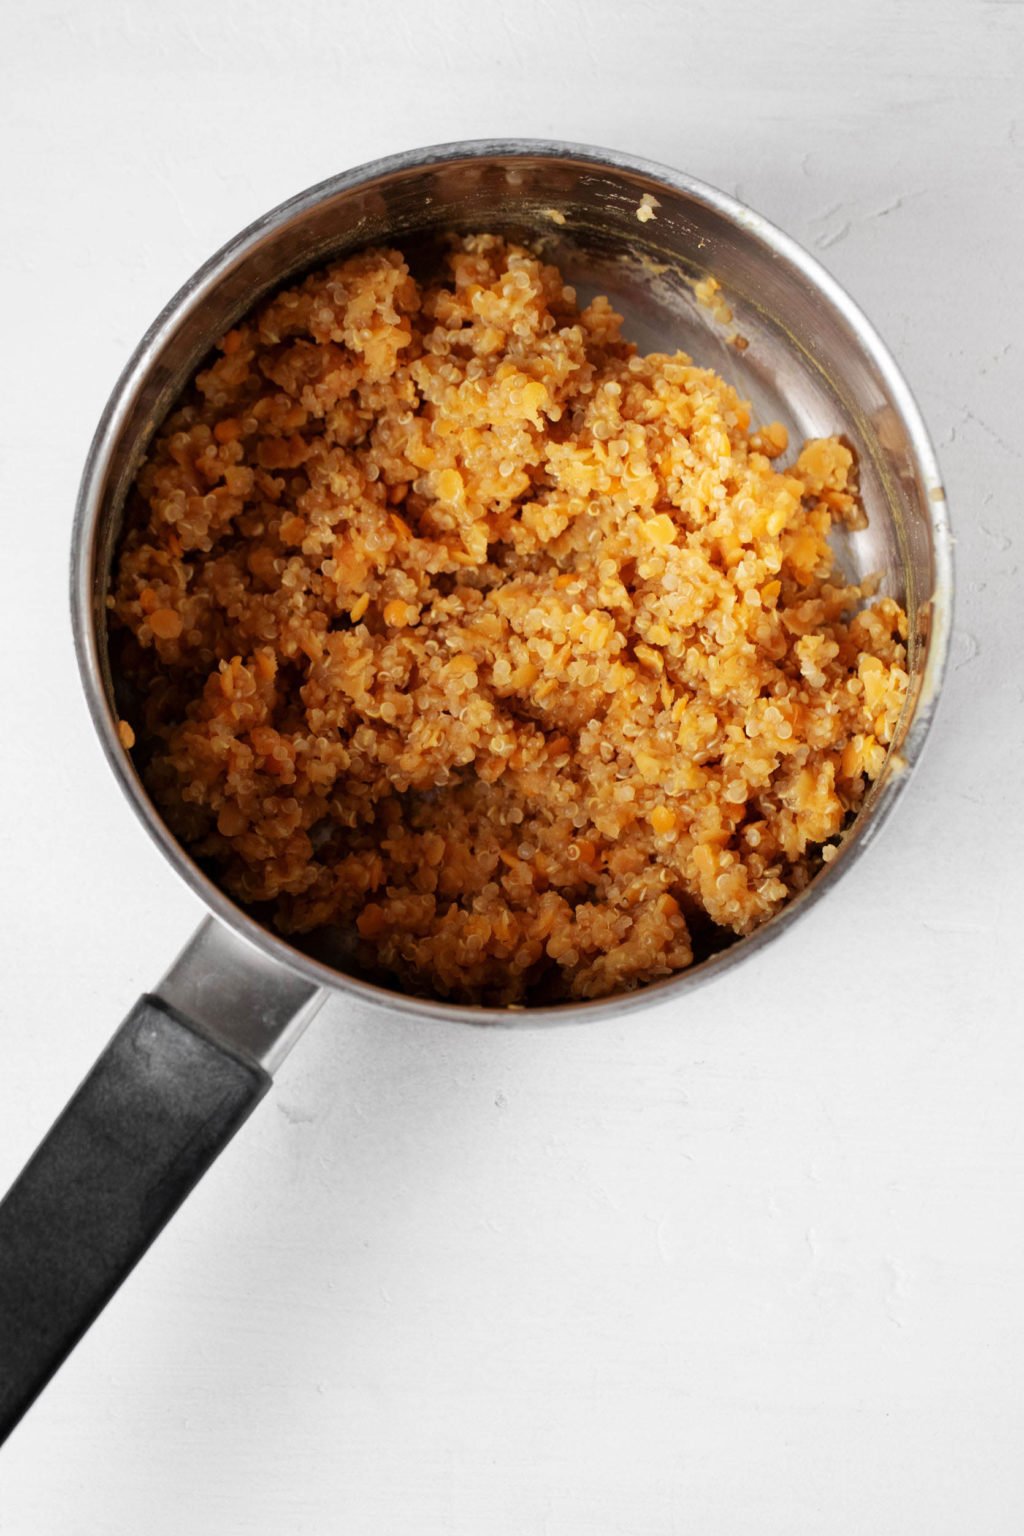 A silver saucepan is filled with a mixture of whole grains, legumes, onions, carrots, and celery. The mixture is a light orange color. The saucepan rests on a white surface.